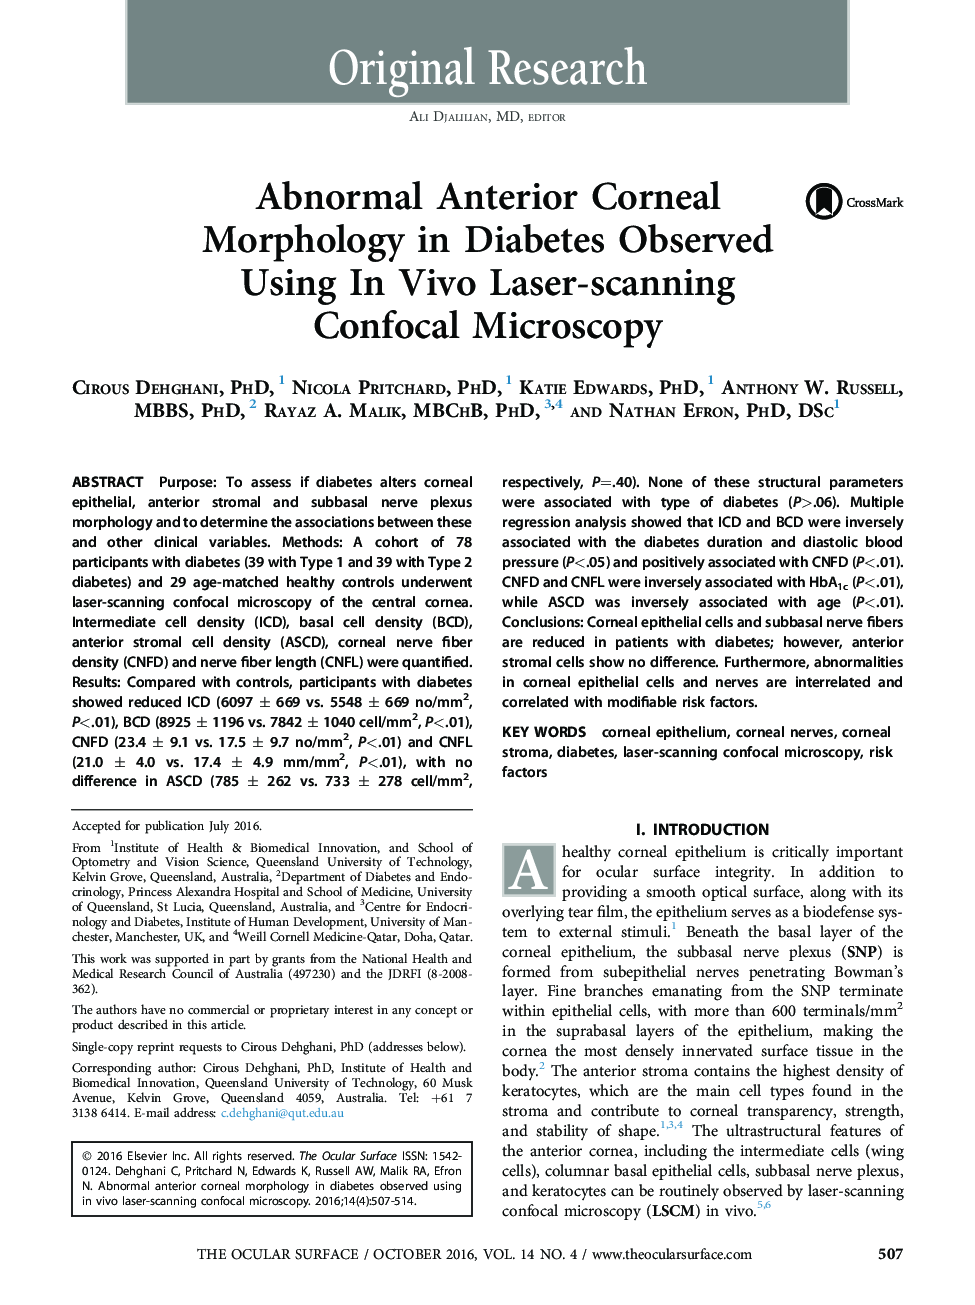 Abnormal Anterior Corneal Morphology in Diabetes Observed Using InÂ Vivo Laser-scanning Confocal Microscopy